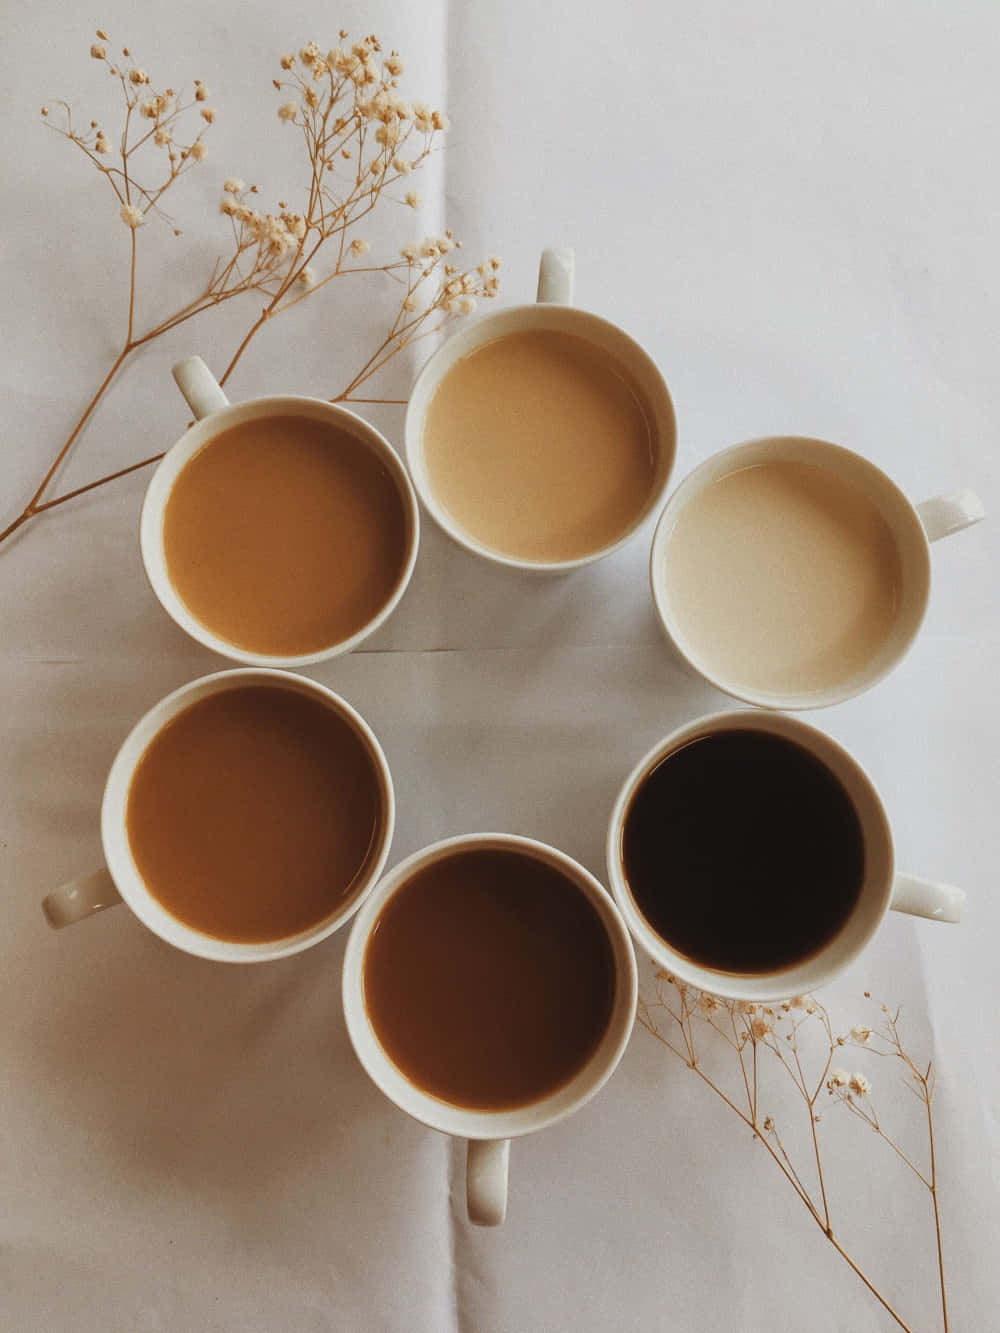 A Group Of Cups With Different Colors Of Coffee